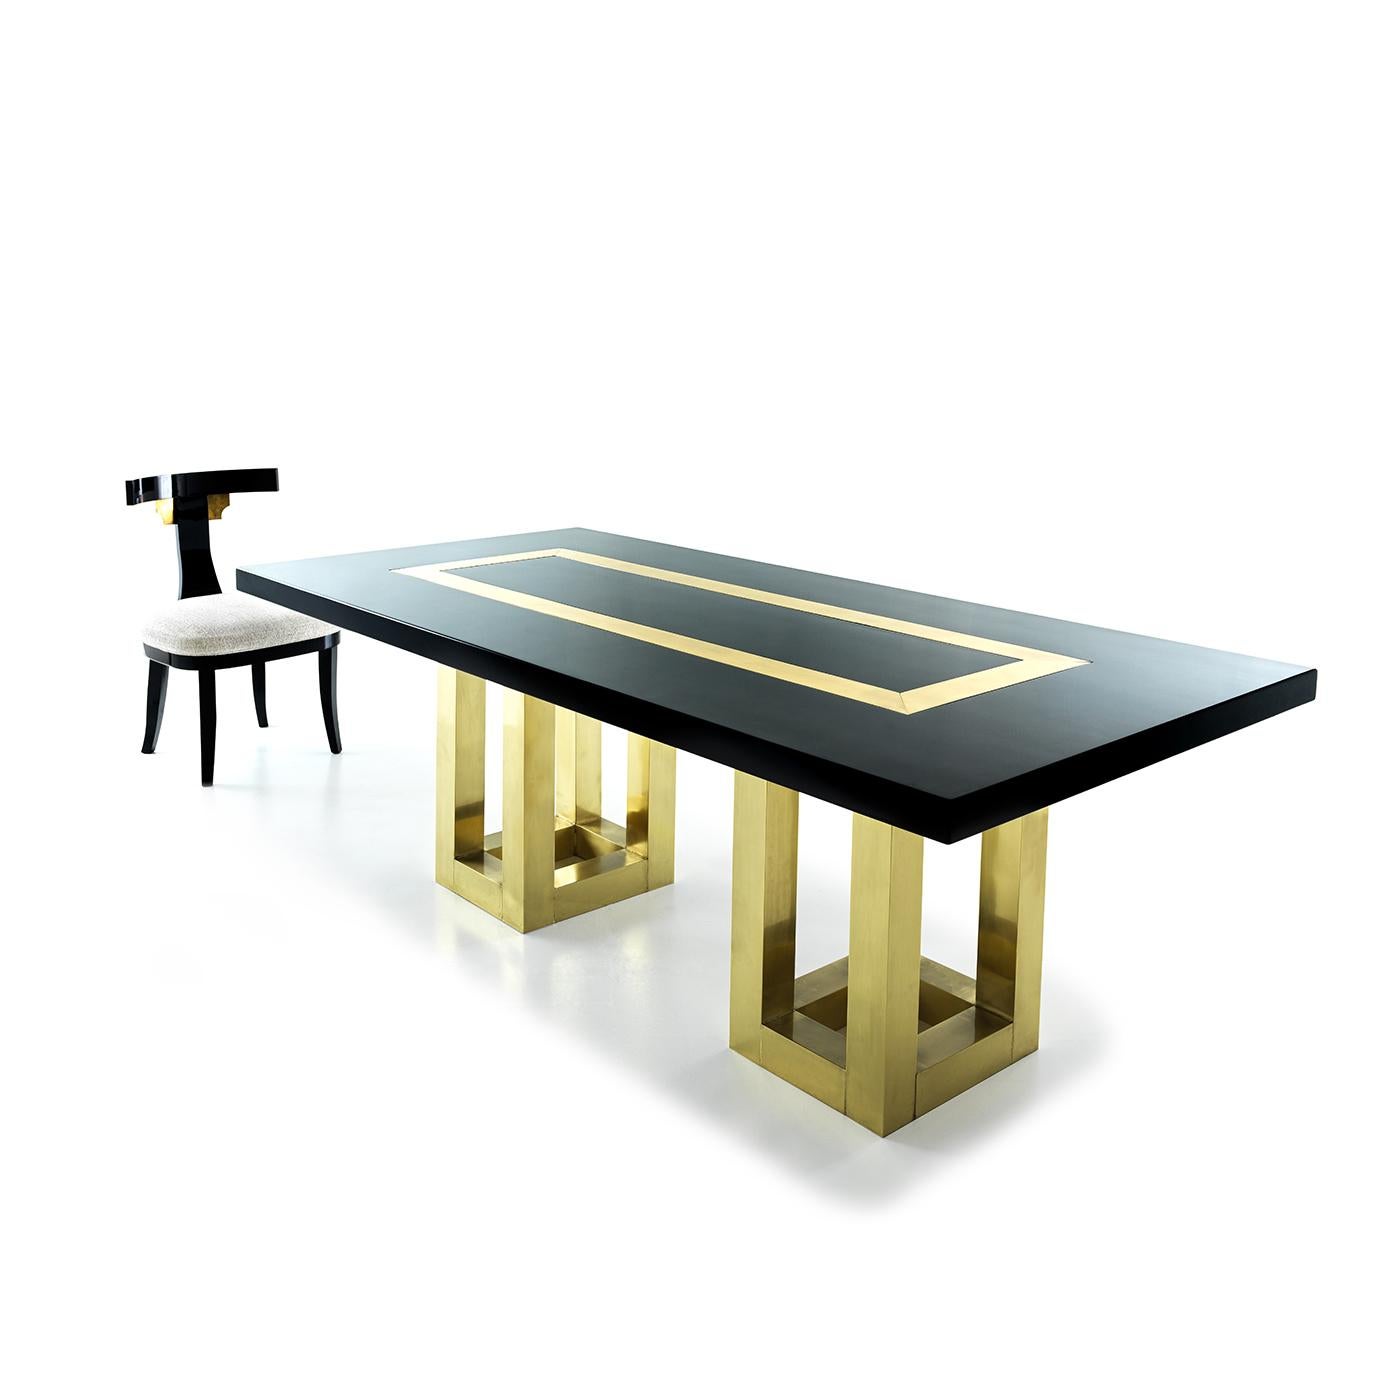 The Atlas table is a fancy piece composed by an elegant black lacquered top in wood with brass inlays supported by a pair of lacquered natural brass legs. It is a truly unique and opulent piece that has the power of making any domestic space look